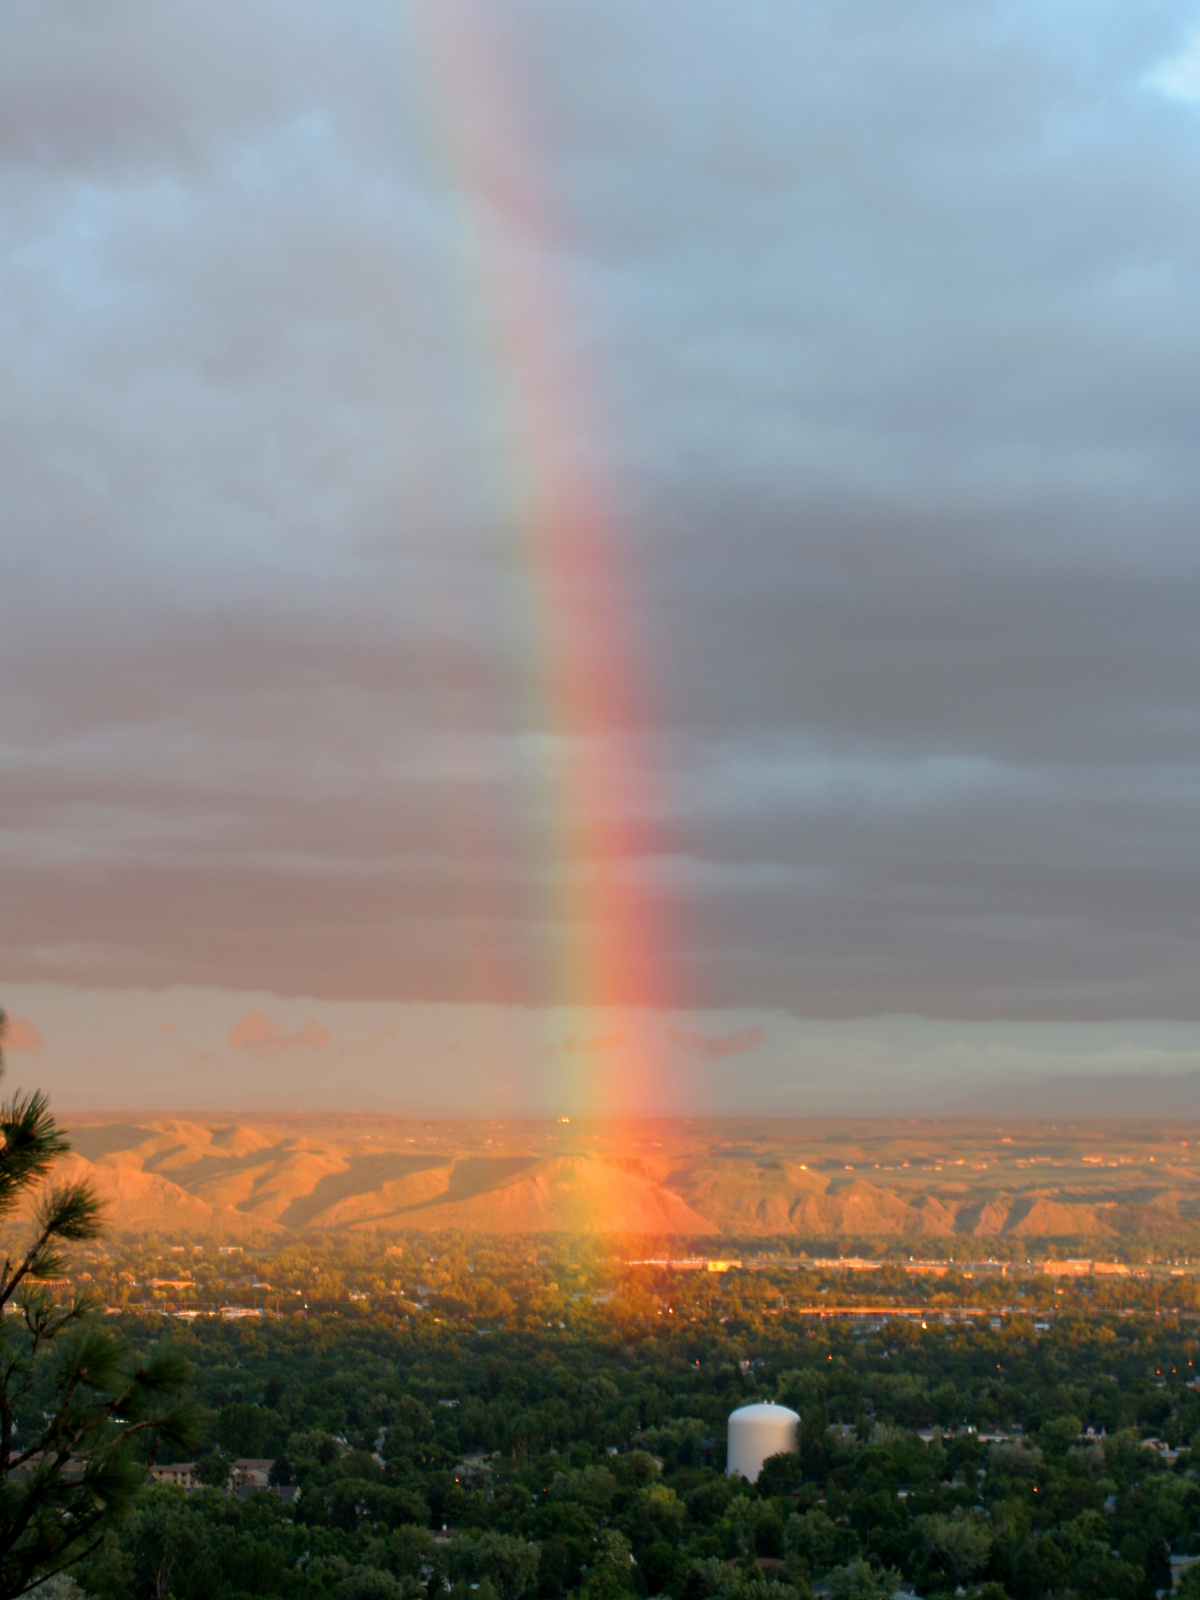 A Rainbow Grows in Billings (Travels » US Trip 2: Cheyenne Epic » Sky and Weather)